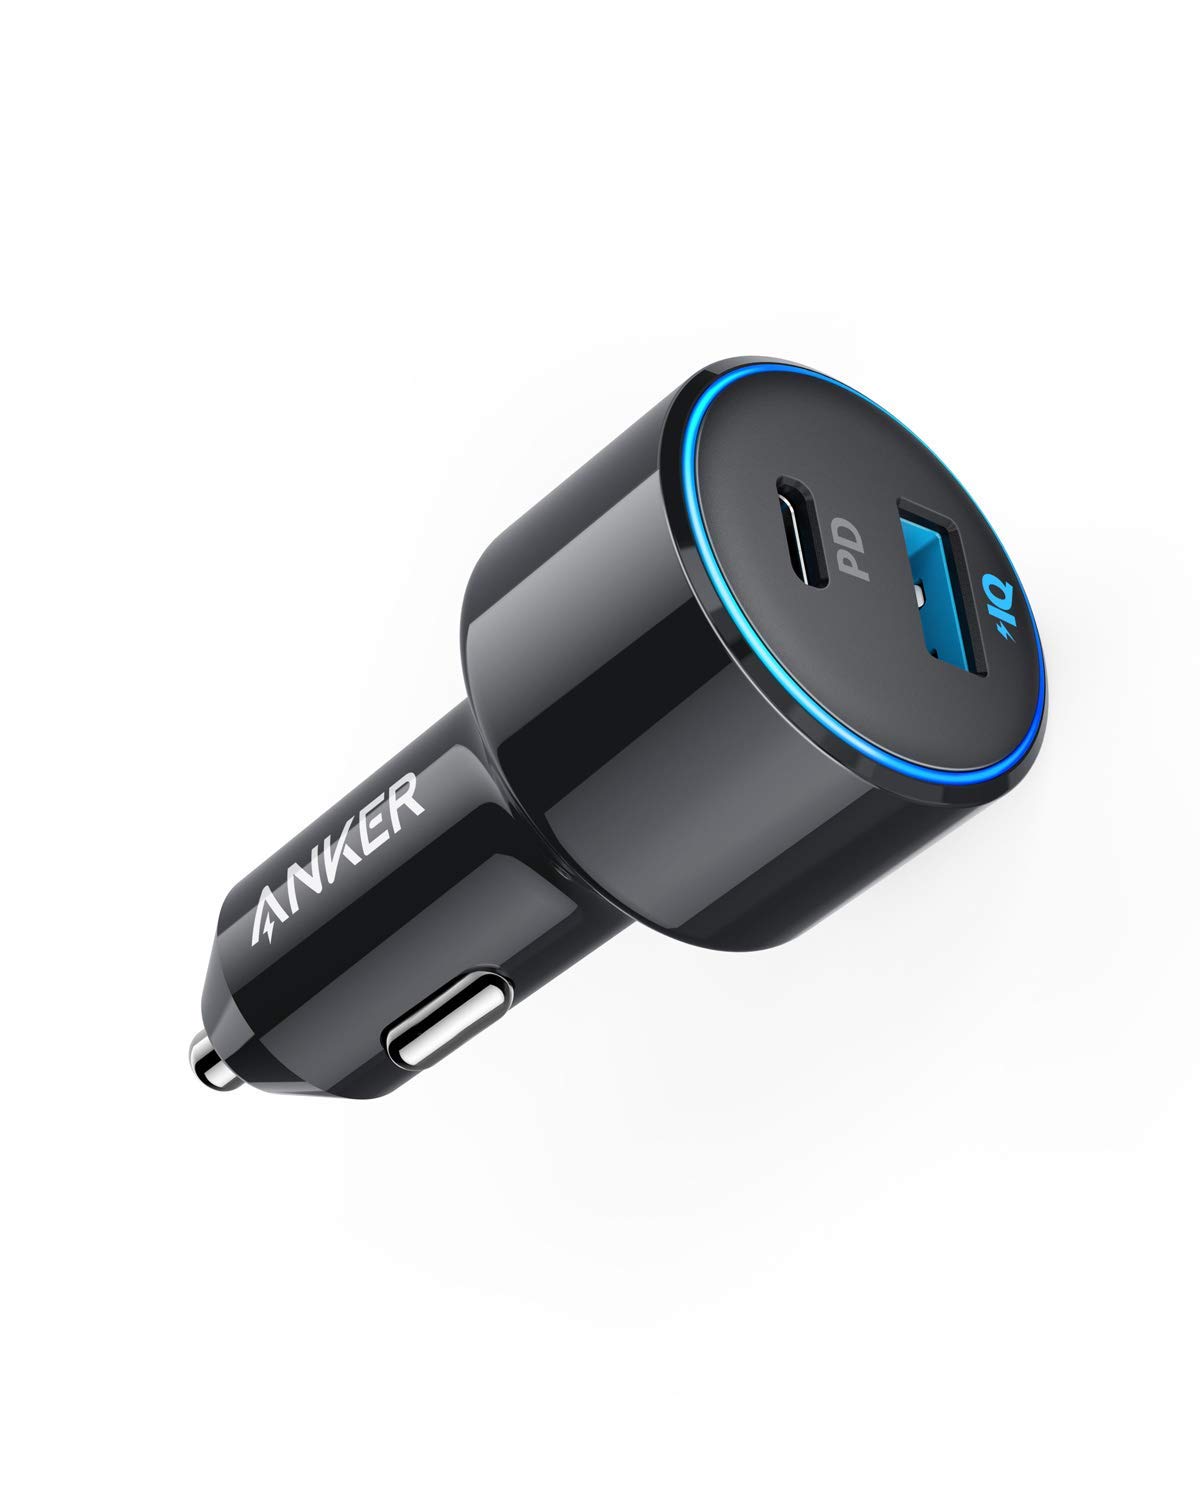 Anker、USB PDに対応した2ポートカーチャージャー｢Anker PowerDrive Speed+ Duo｣を発売